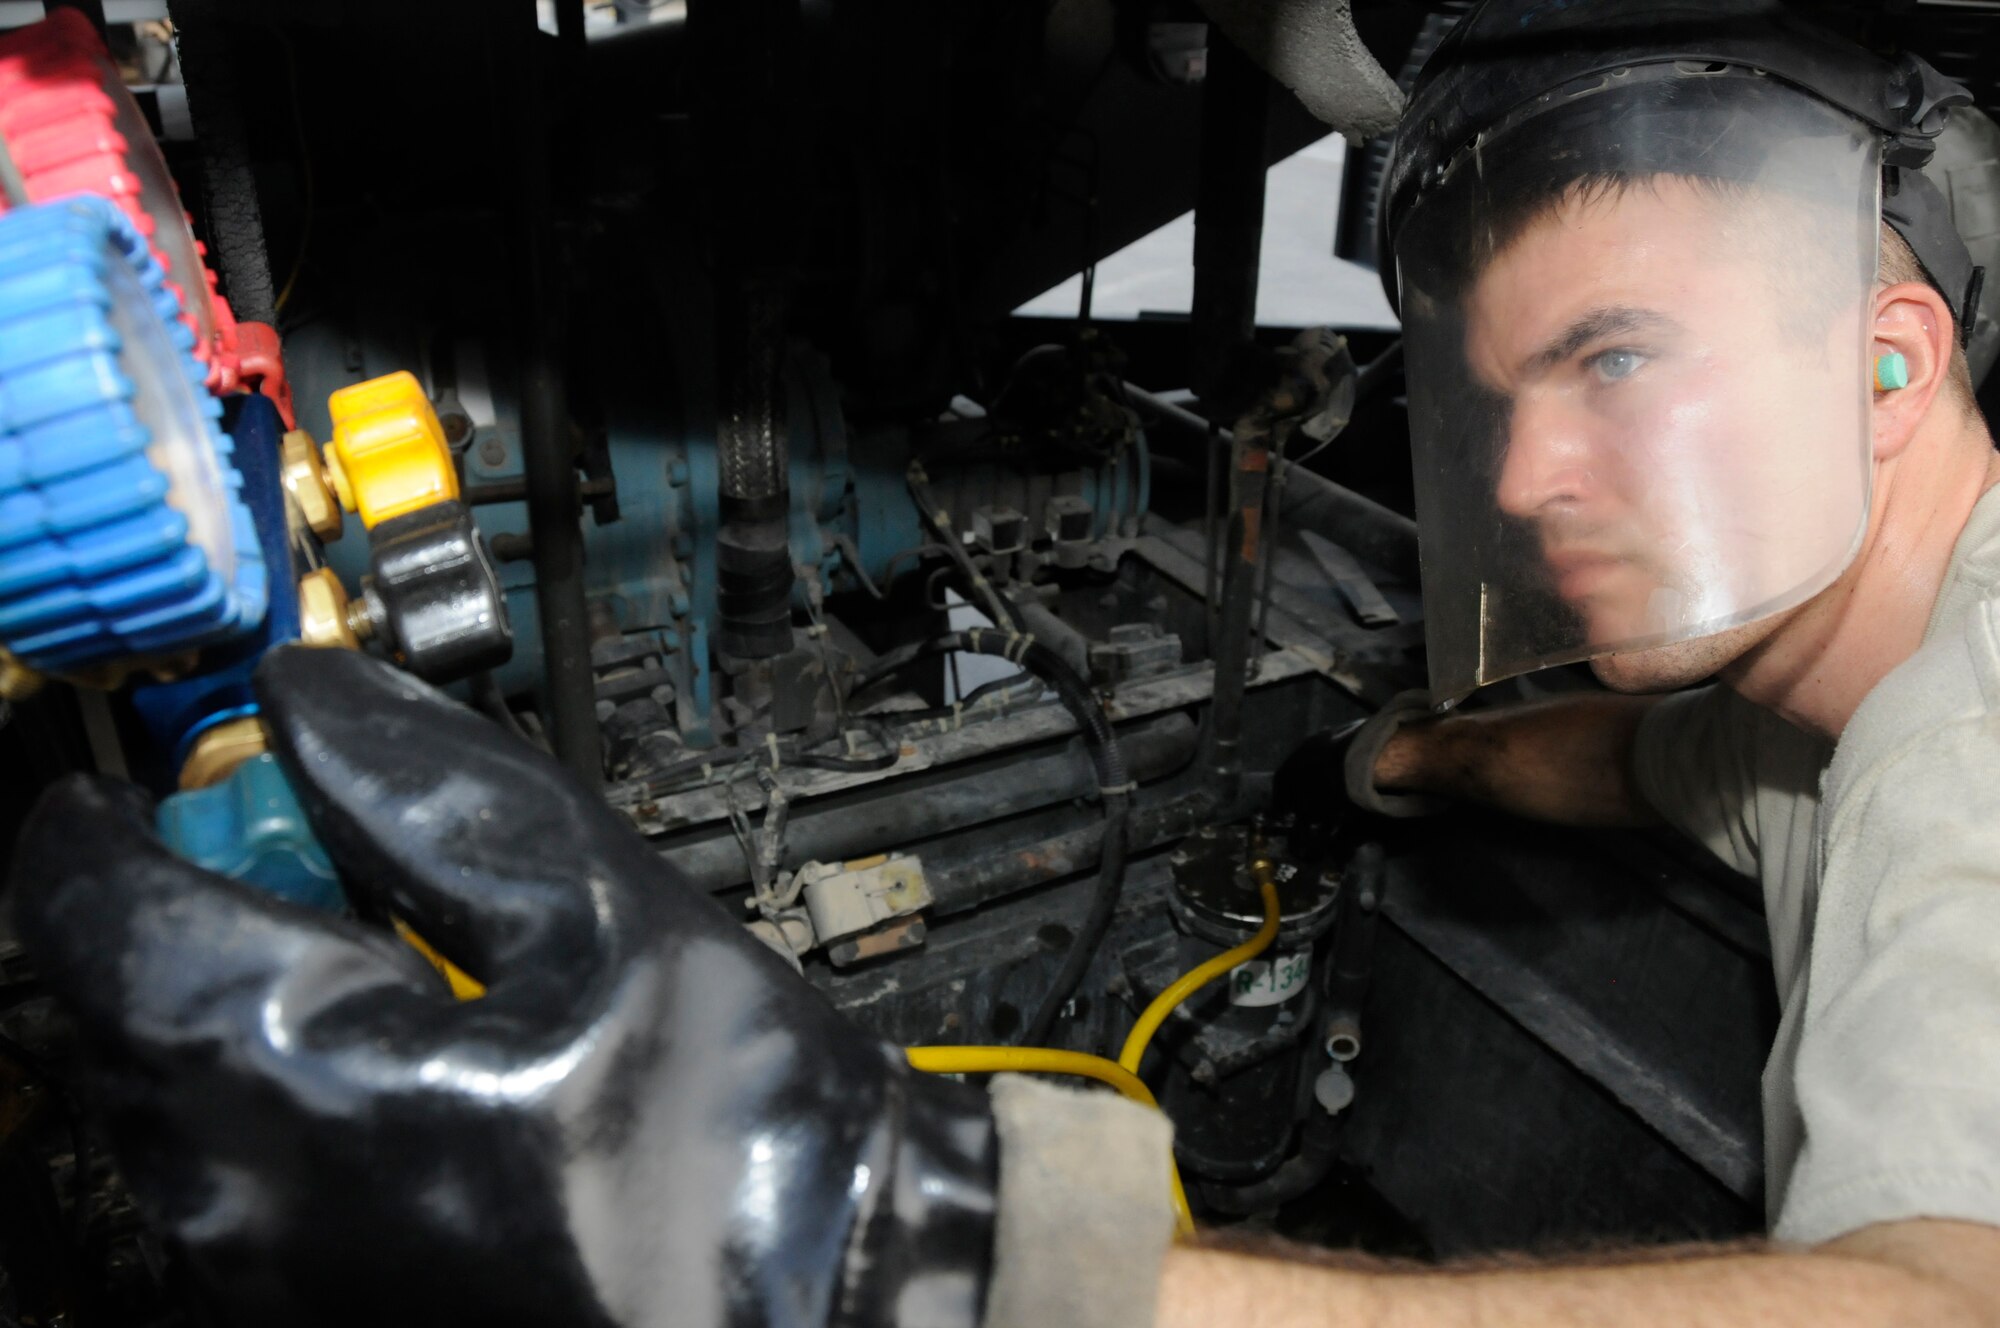 Senior Airman Shawn Scrivens, aerospace ground equipment (AGE) maintainer assigned to the 379th Expeditionary Maintenance Squadron, removes Freon from filters and angle valves Aug. 23, 2008, at an undisclosed air base in Southwest Asia. Airman Scriven is responsible for maintaining equipment required to support Air Force aircraft while on the tarmac. Airman Scriven, a native of Little Cooley, Pa., is deployed from Robins Air Force Base, Ga., in support of Operations Iraqi Freedom, Enduring Freedom and Joint Task Force-Horn of Africa. (U.S. Air Force photo by Staff Sgt. Darnell T. Cannady/Released)